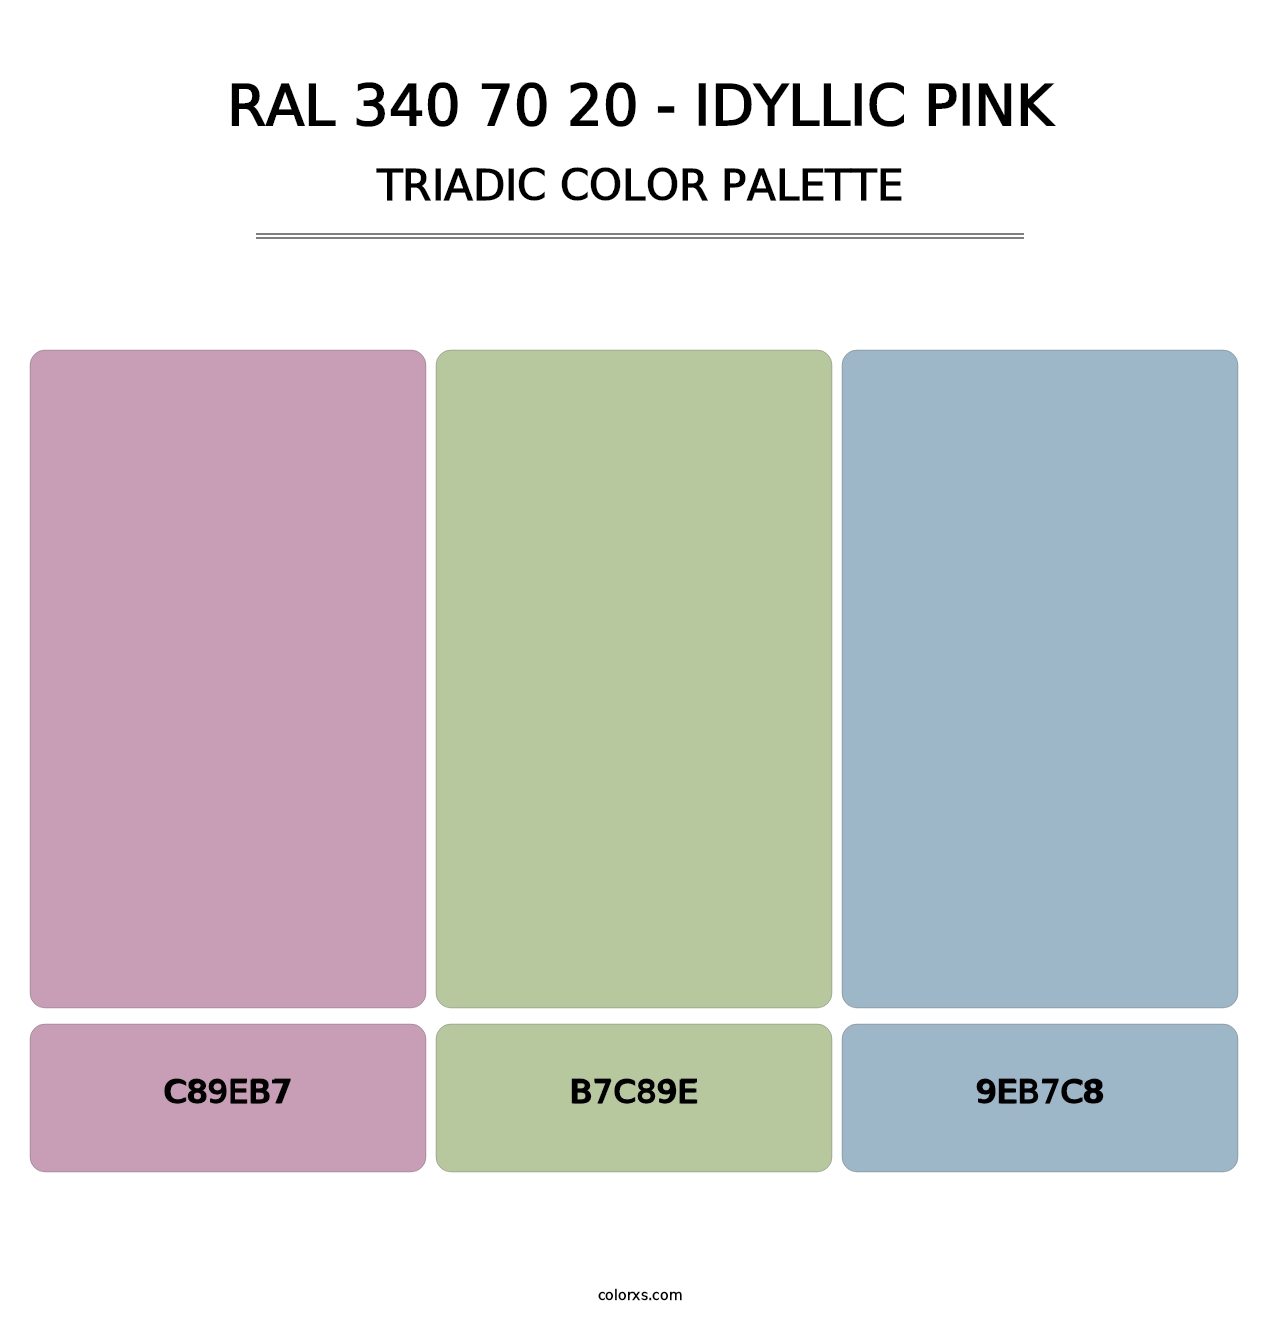 RAL 340 70 20 - Idyllic Pink - Triadic Color Palette